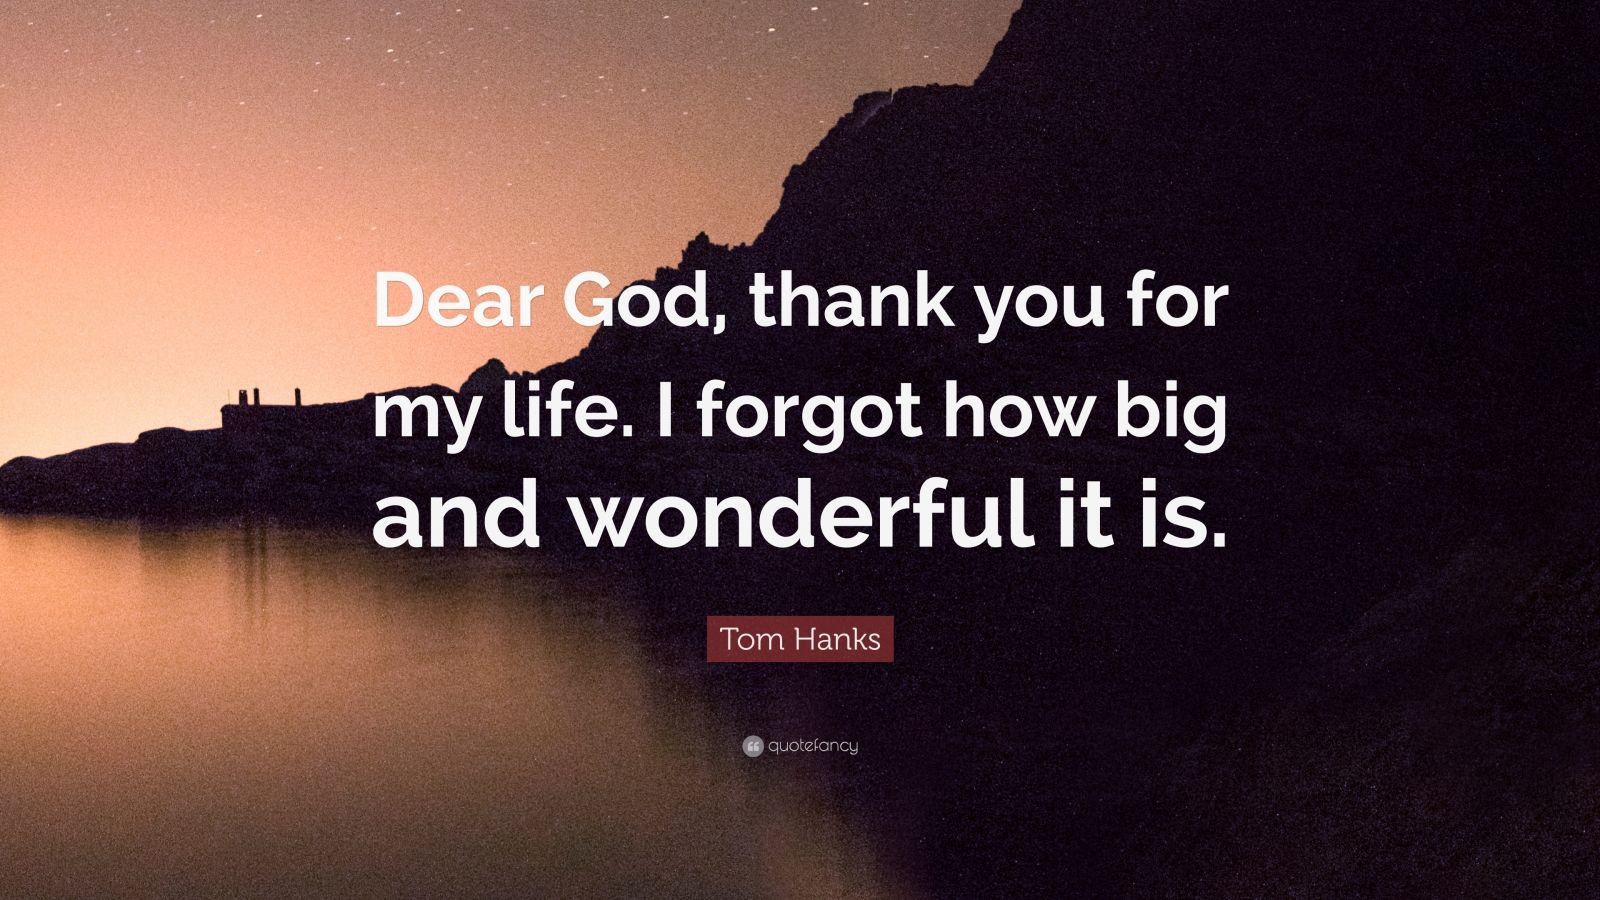 Tom Hanks Quote “Dear God, thank you for my life. I